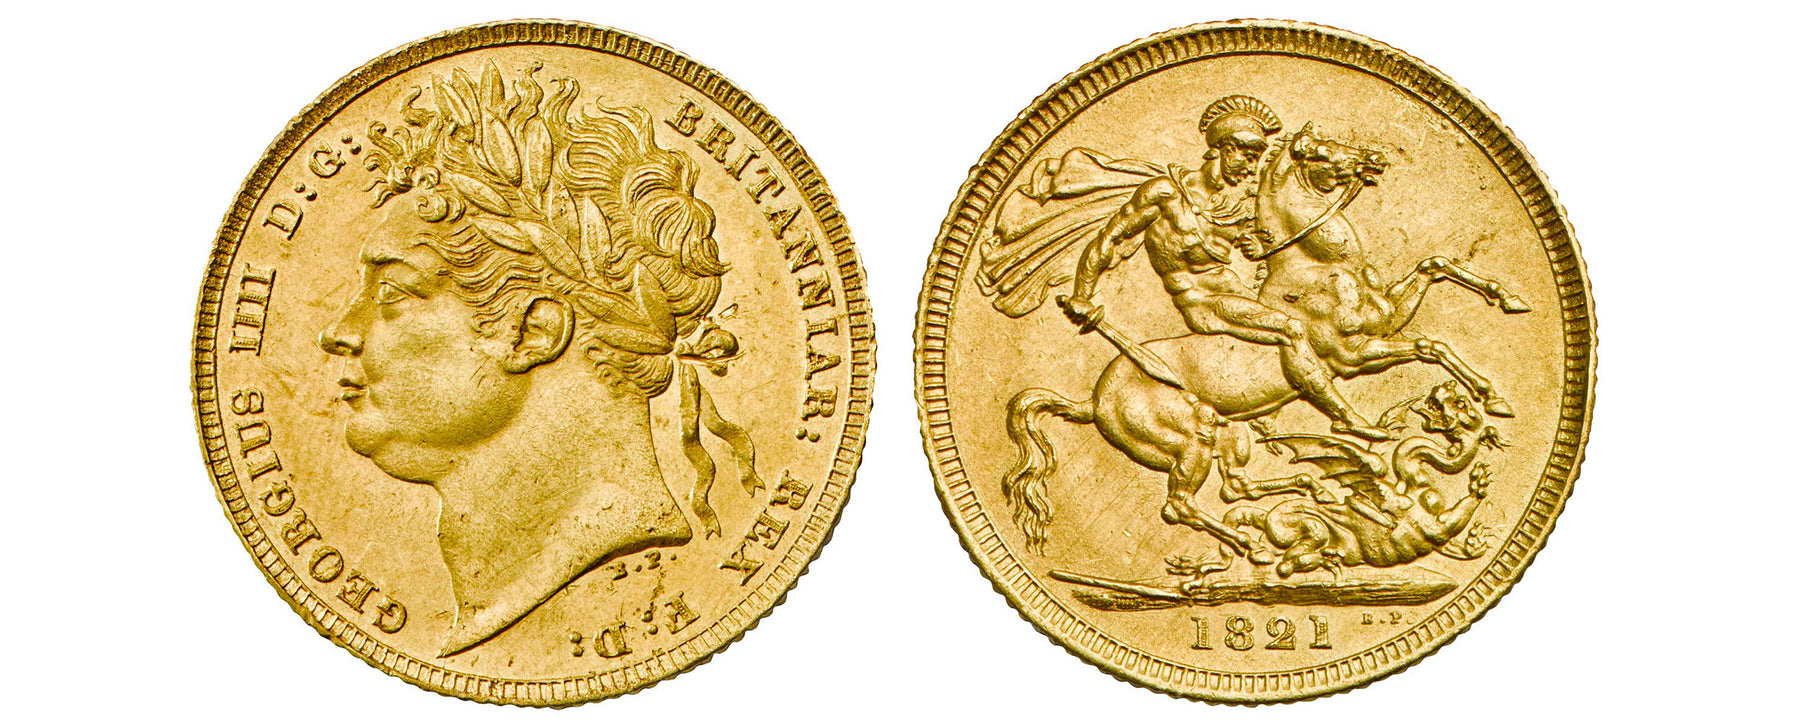 The Gold Standard and What it Meant for Collectible Gold Coins